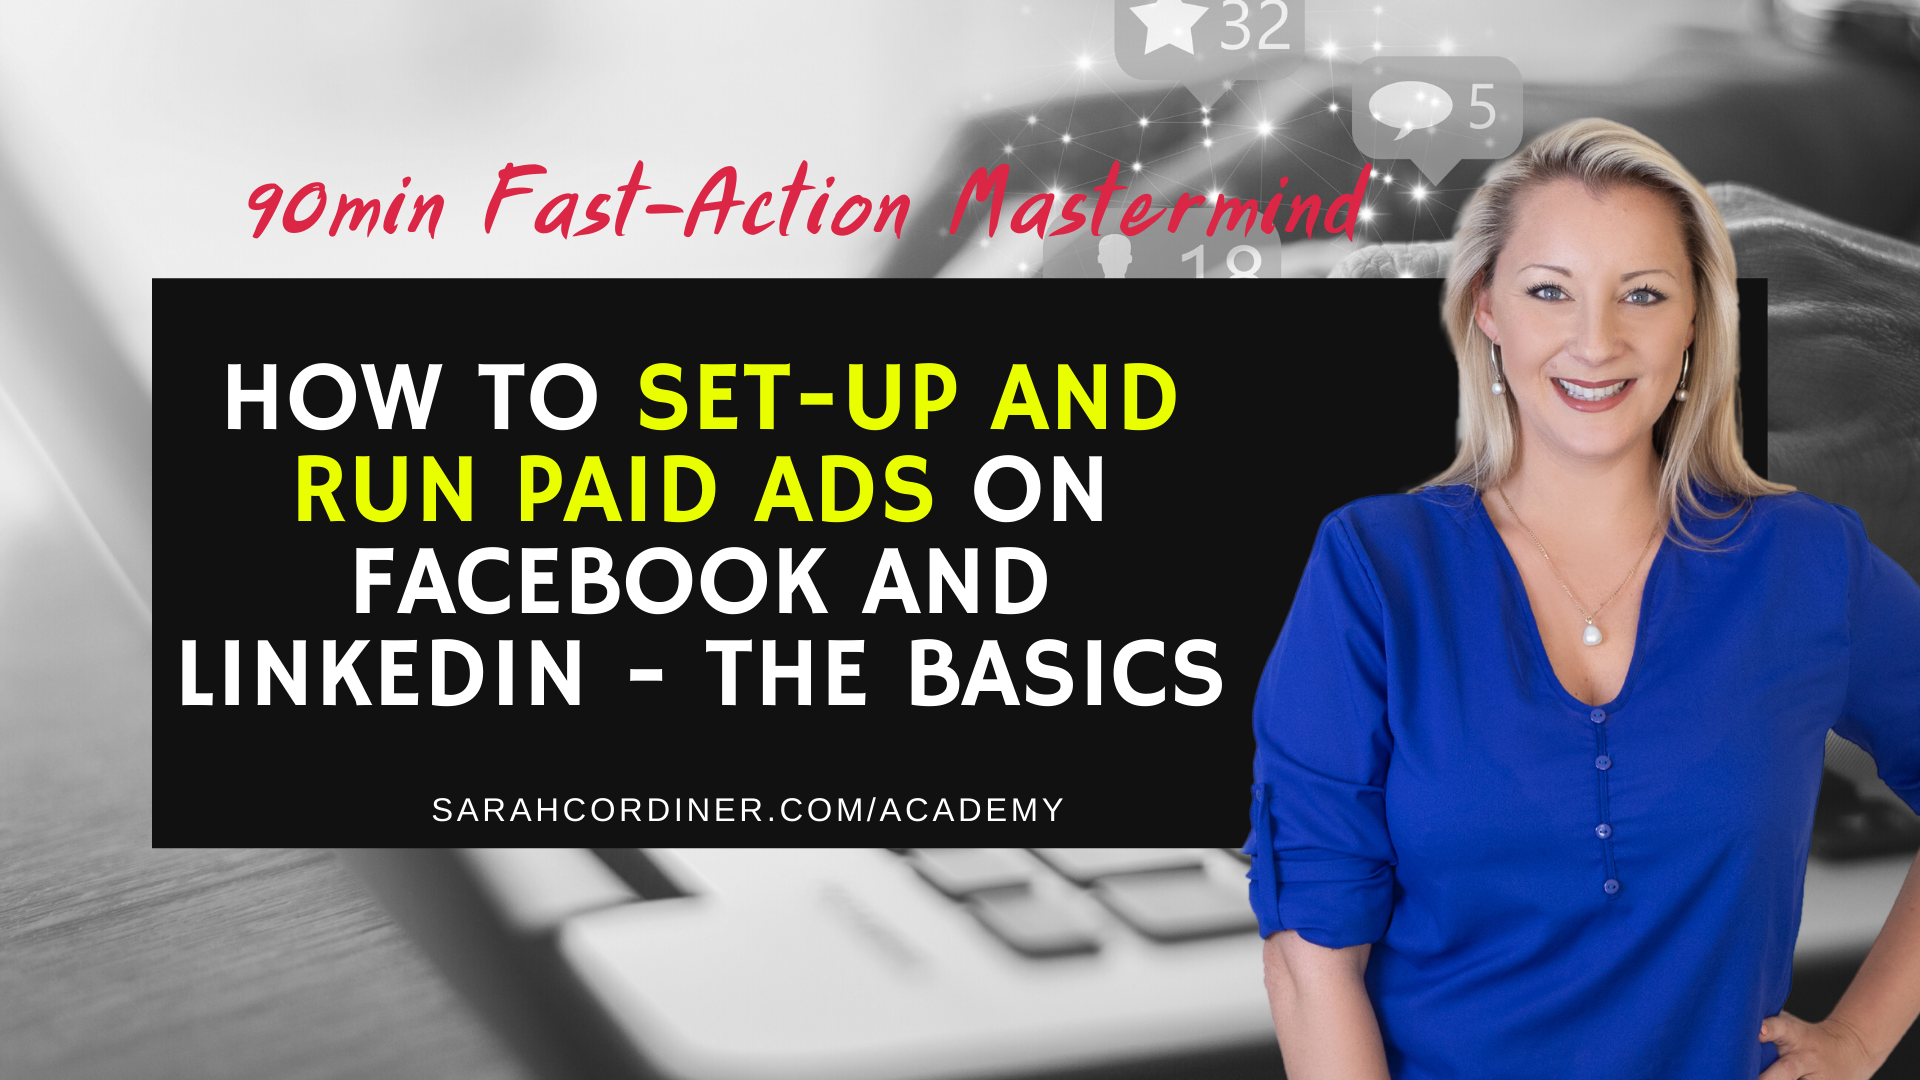 How To Set-Up and Run Paid Ads on Facebook and LinkedIn - The Basics